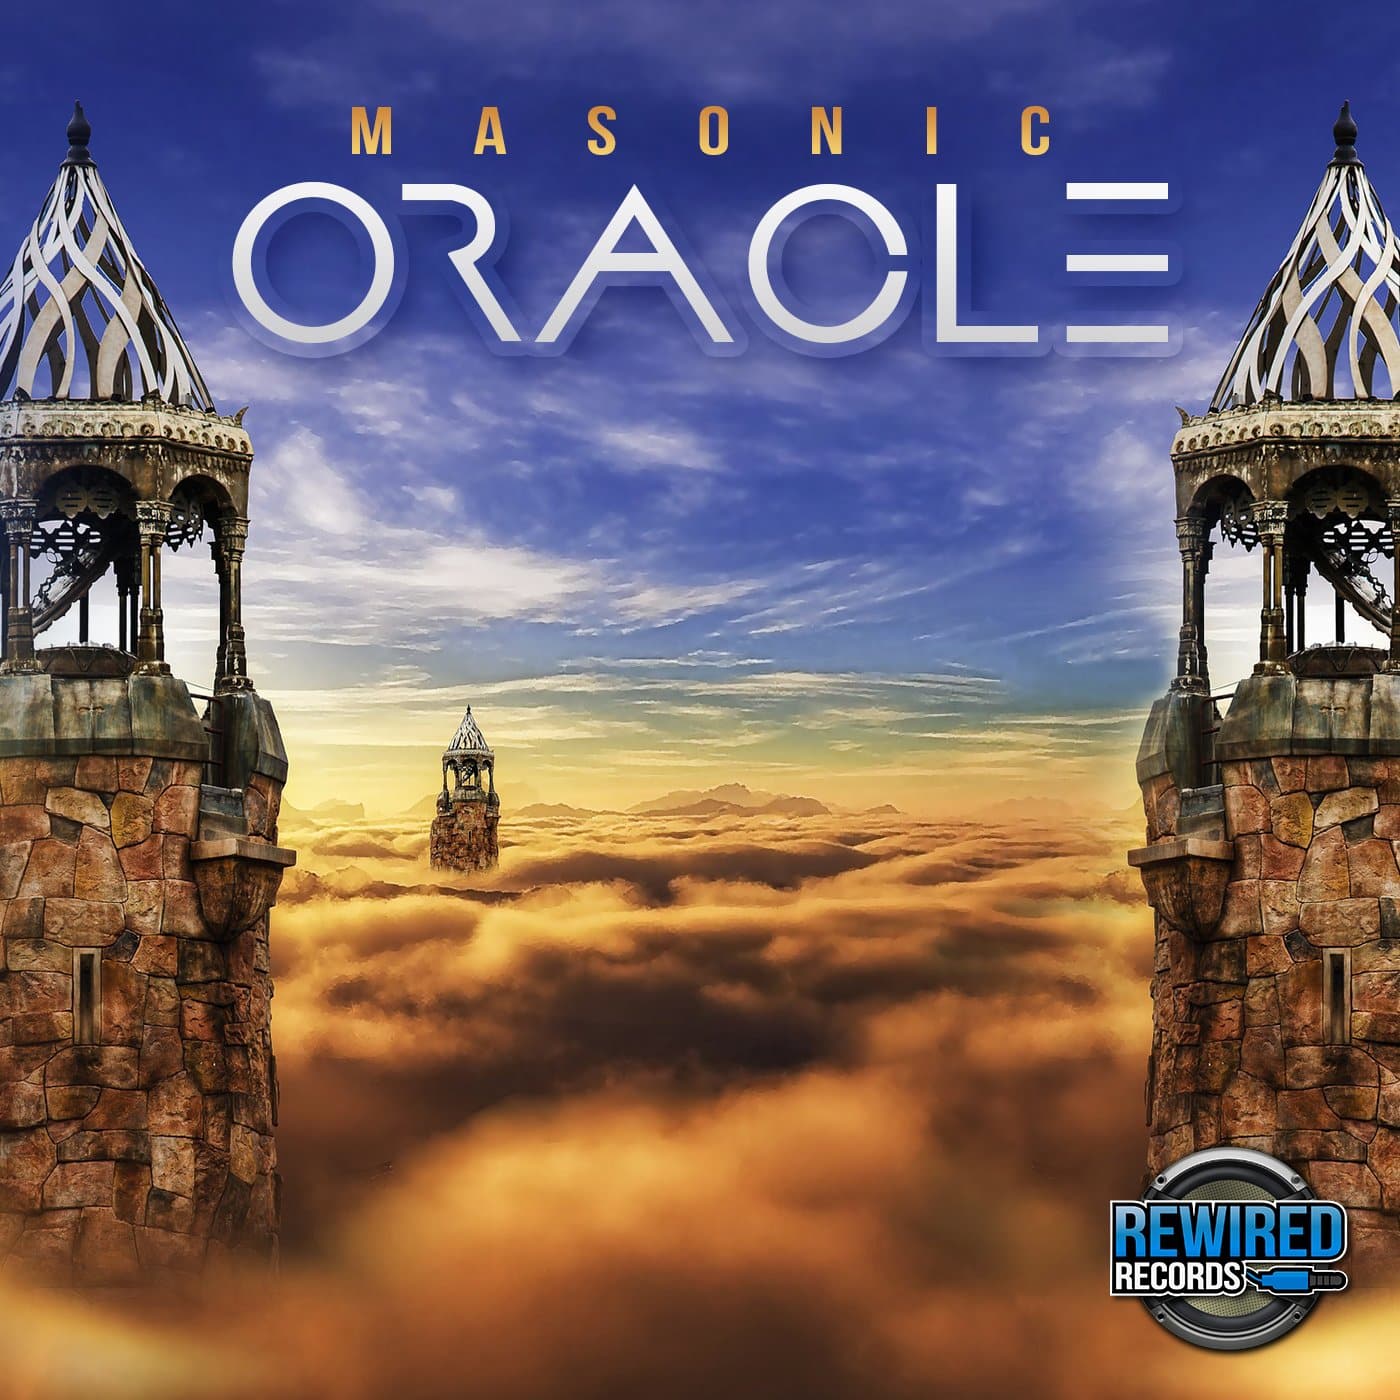 Masonic - Oracle - Rewired Records